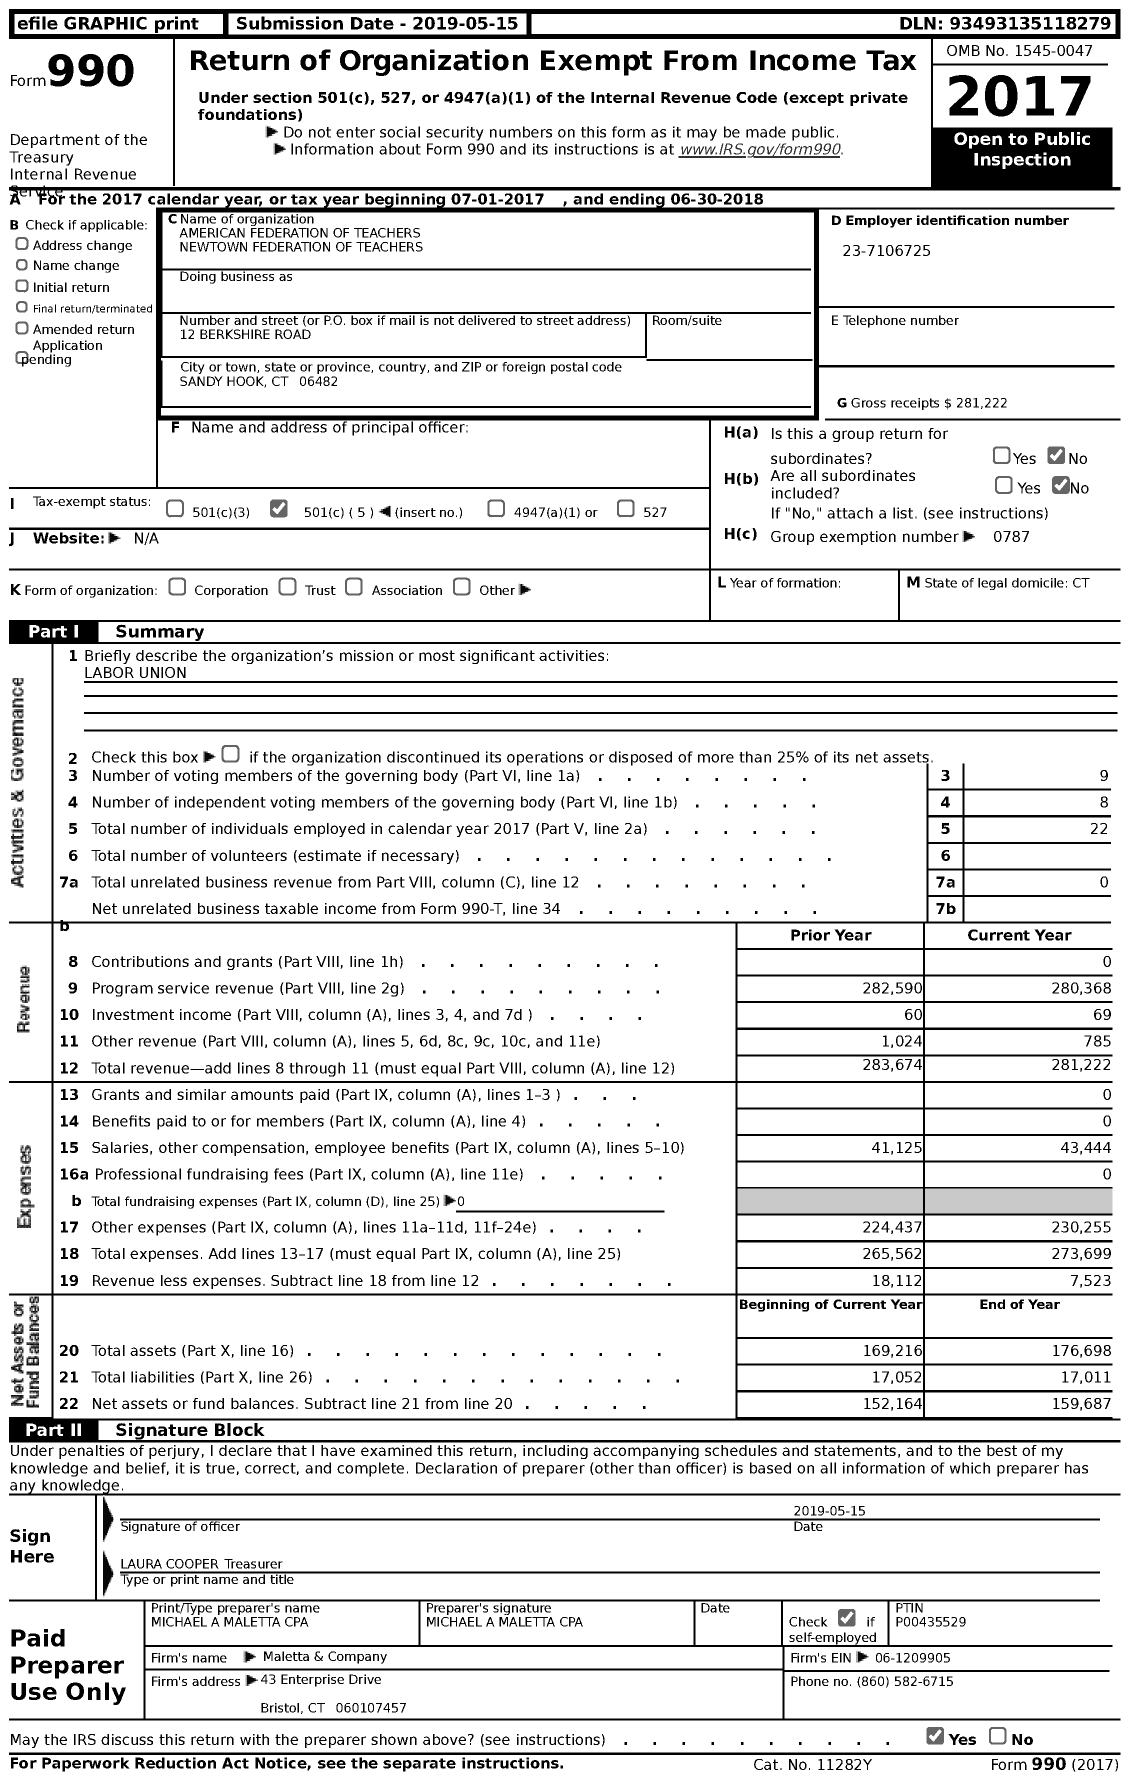 Image of first page of 2017 Form 990 for American Federation of Teachers Newtown Federation of Teachers